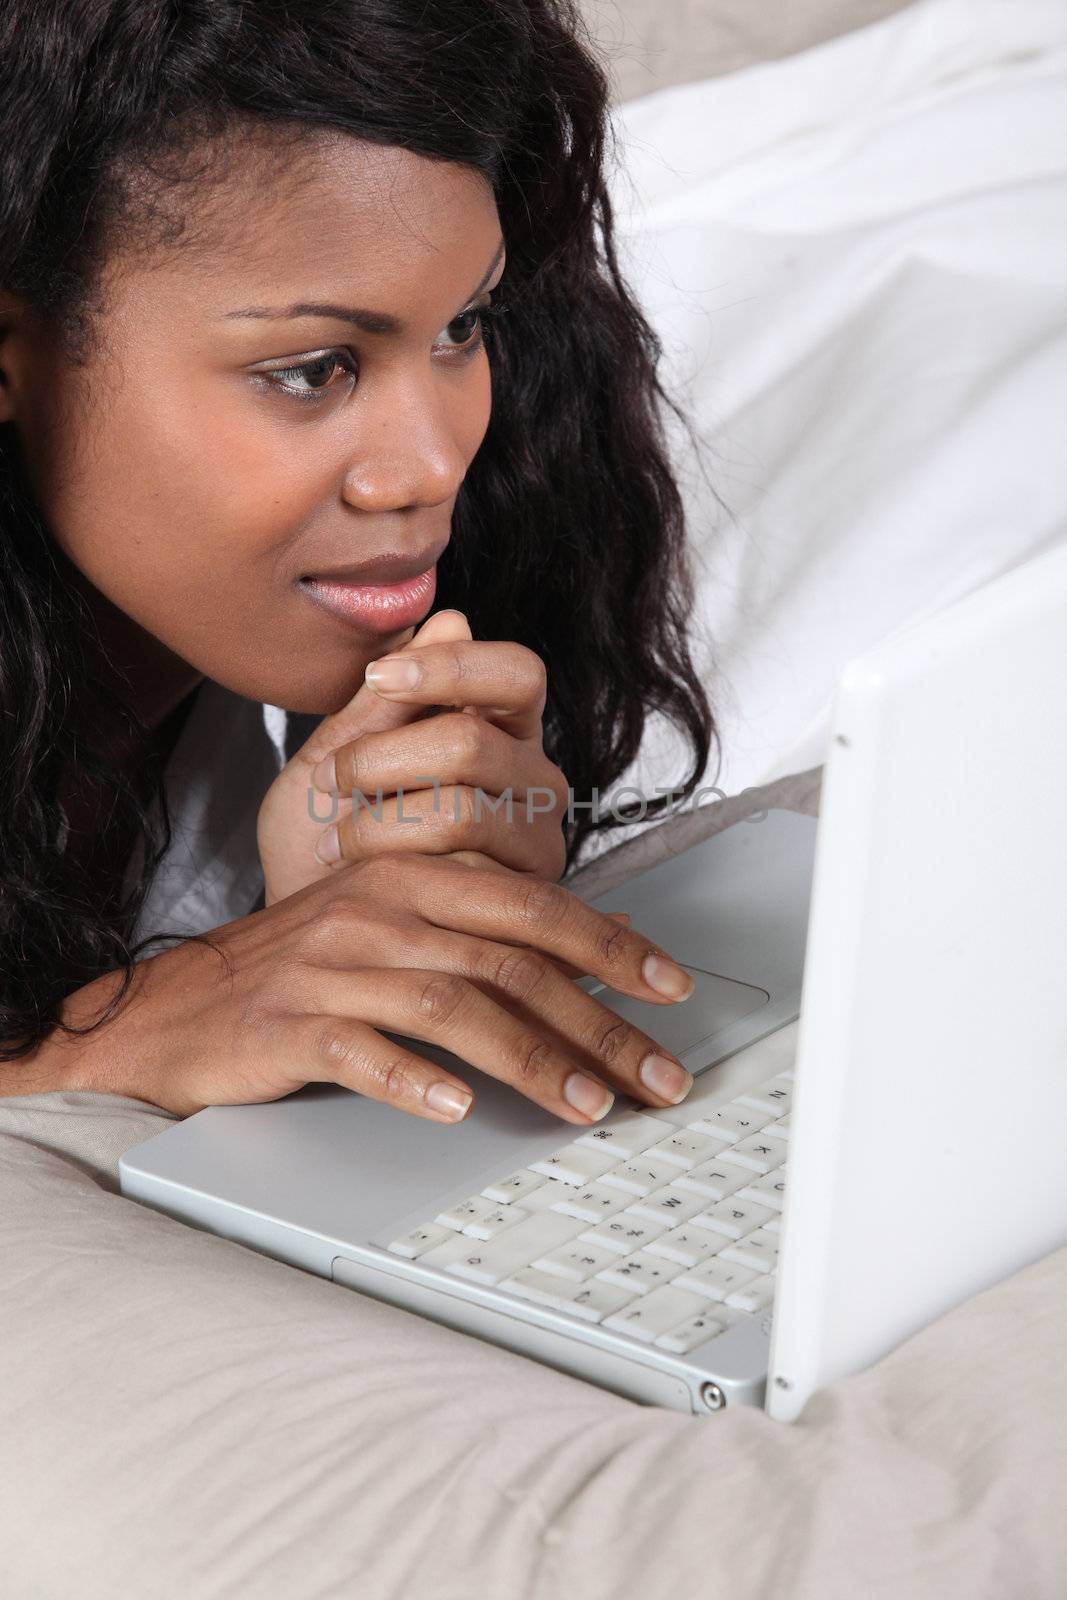 Black lady using laptop in bed by phovoir